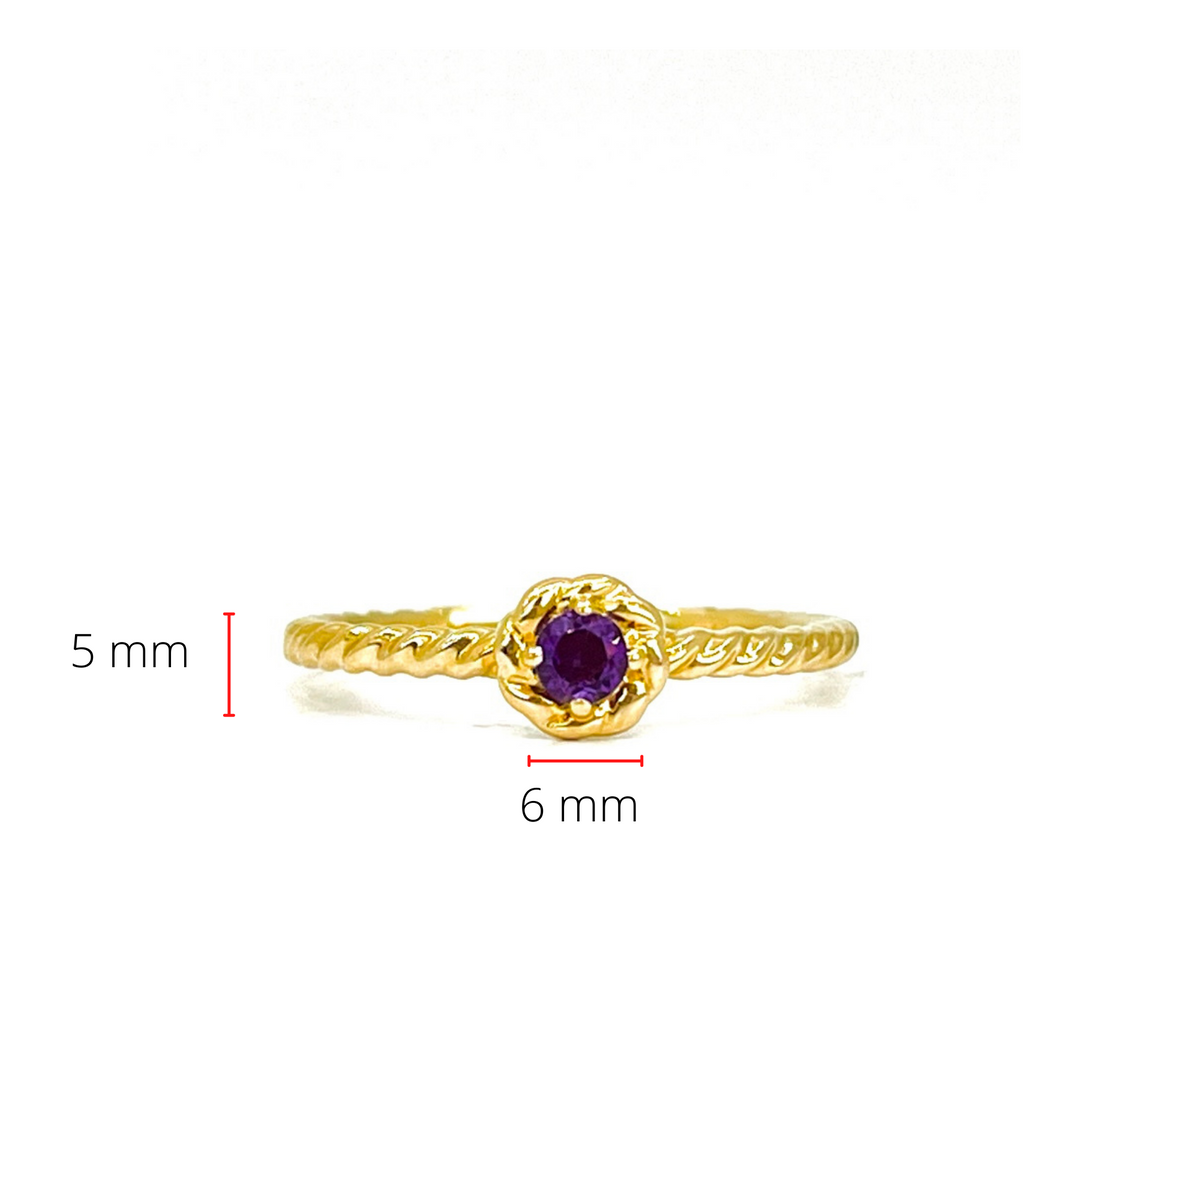 10K Yellow Gold 0.10cttw Genuine Amethyst  Halo Ring, size 6.5